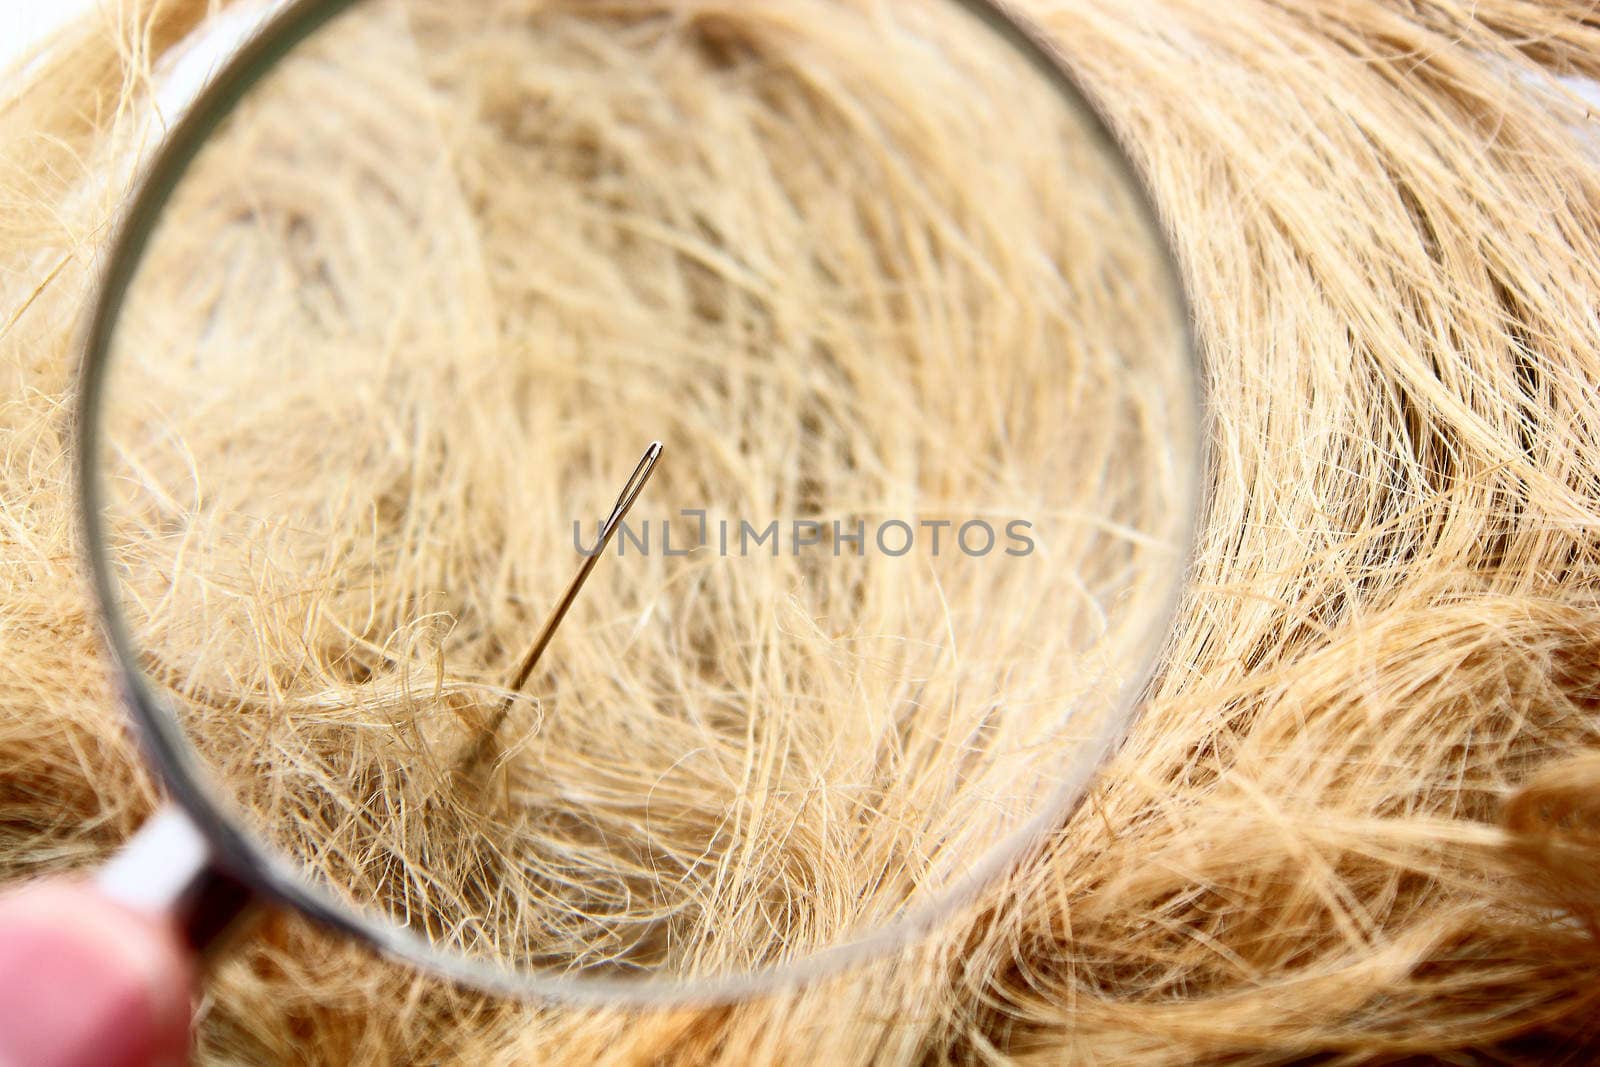 Magnification glass, needle and haystack composition